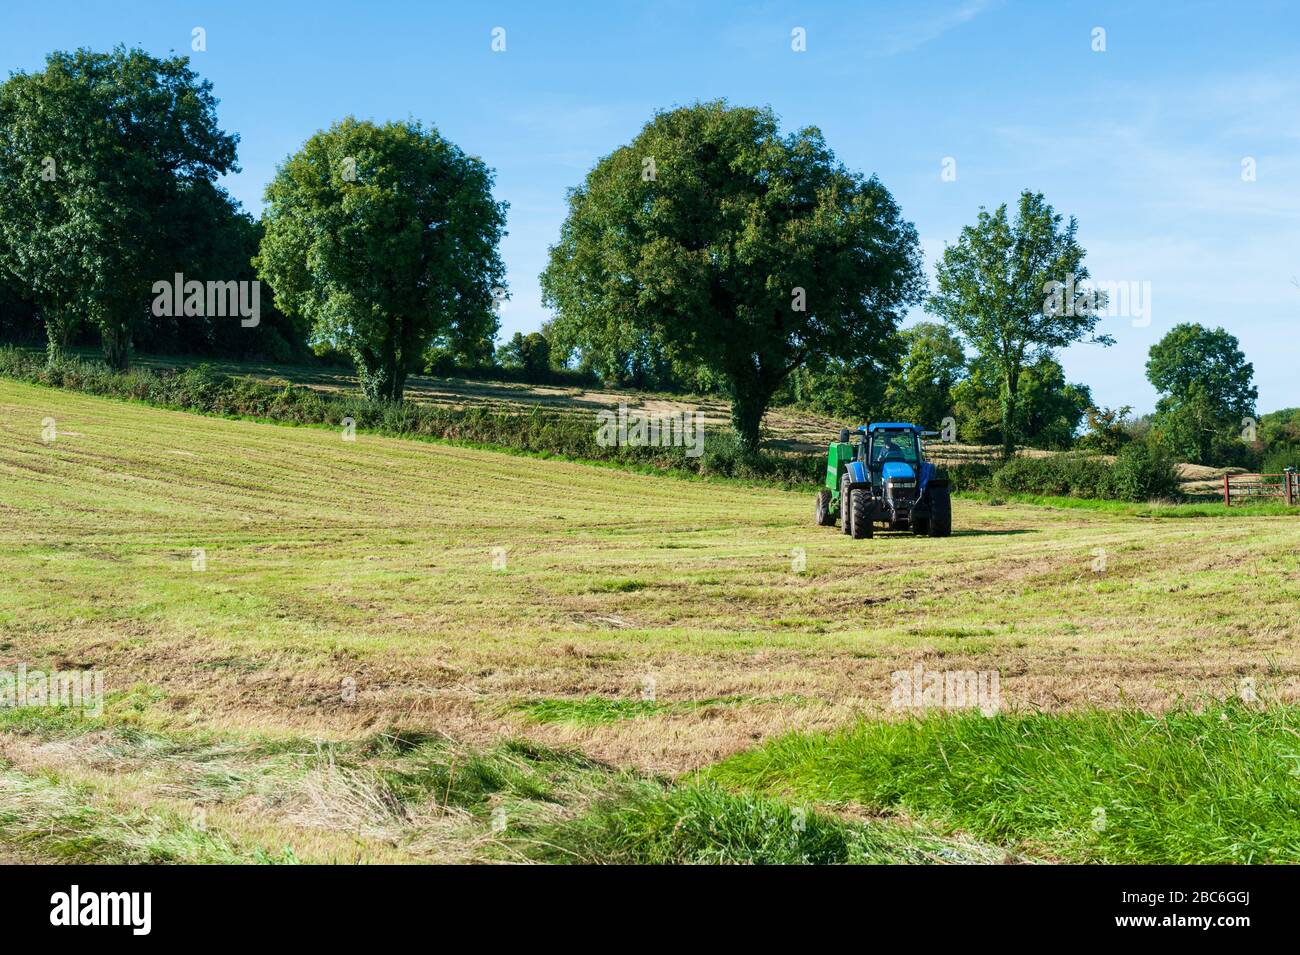 Tractor and Harvesting machine working in a green field Stock Photo